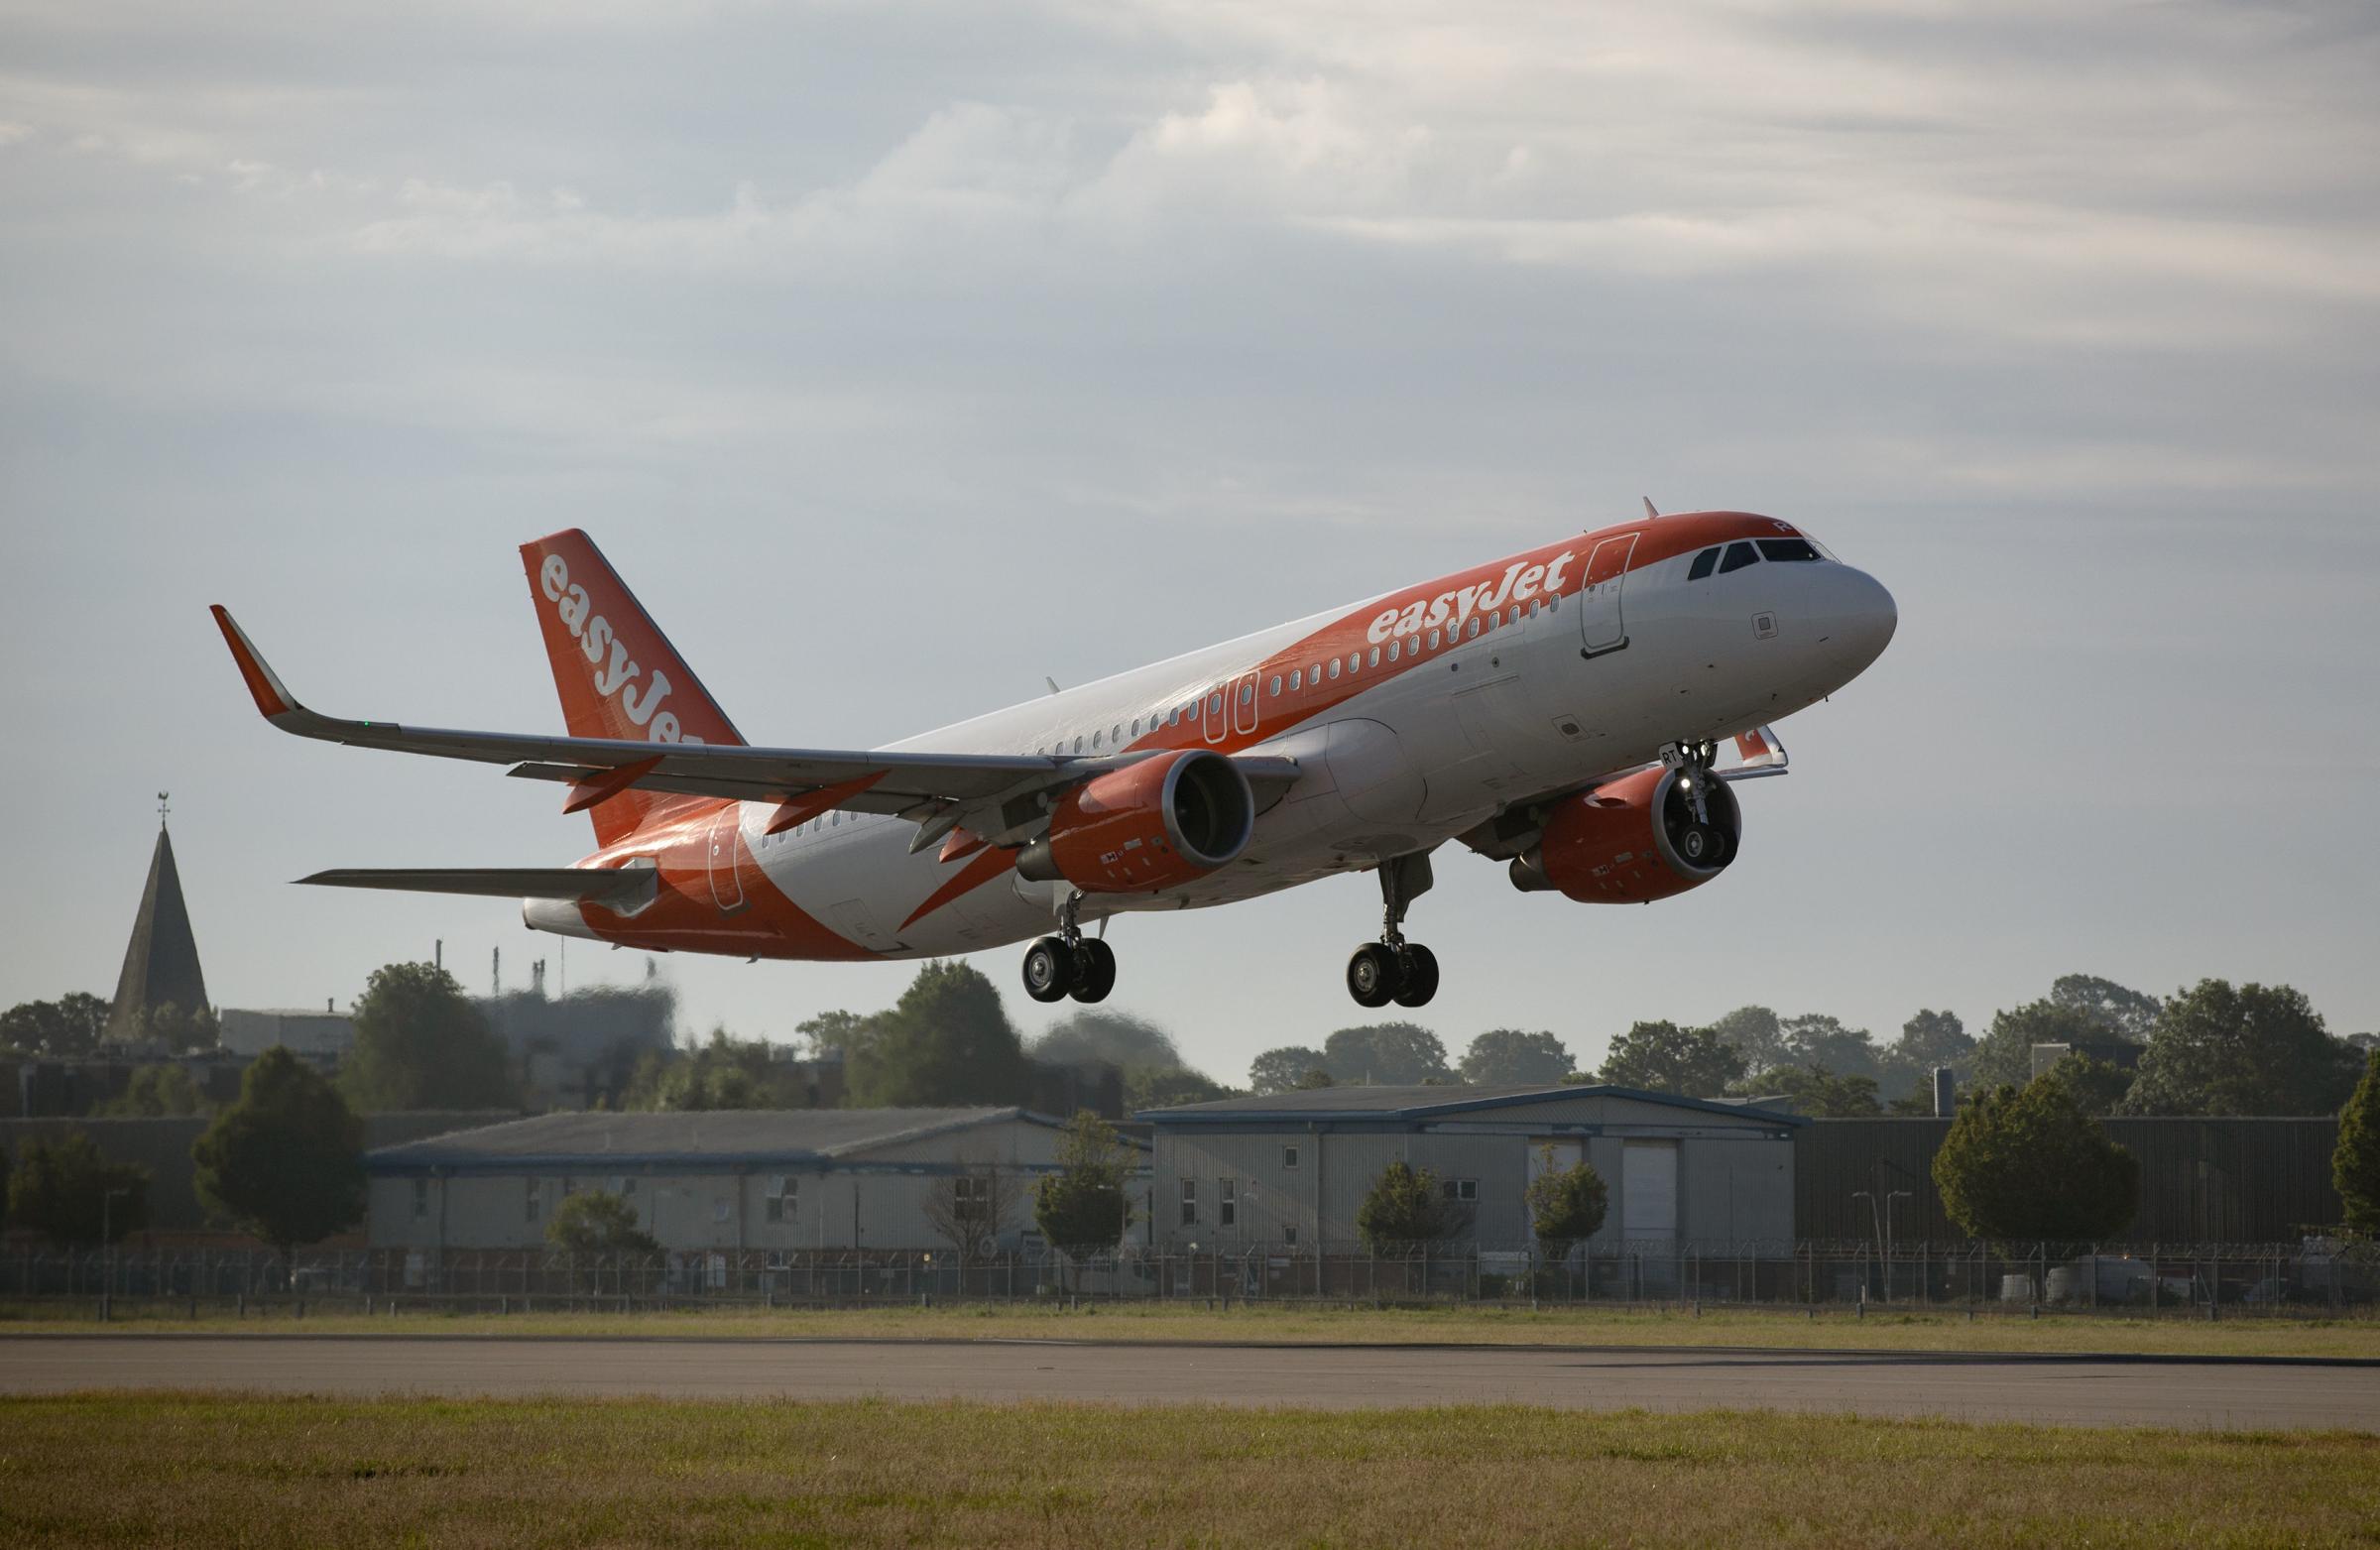 EDITORIAL USE ONLY .easyJet flight EZY883 takes-off from London Gatwick bound for Glasgow as the airline restarts operations for the first time in 11 weeks since the carrier grounded all planes on March 30th as a result of the Covid-19 pandemic. PA